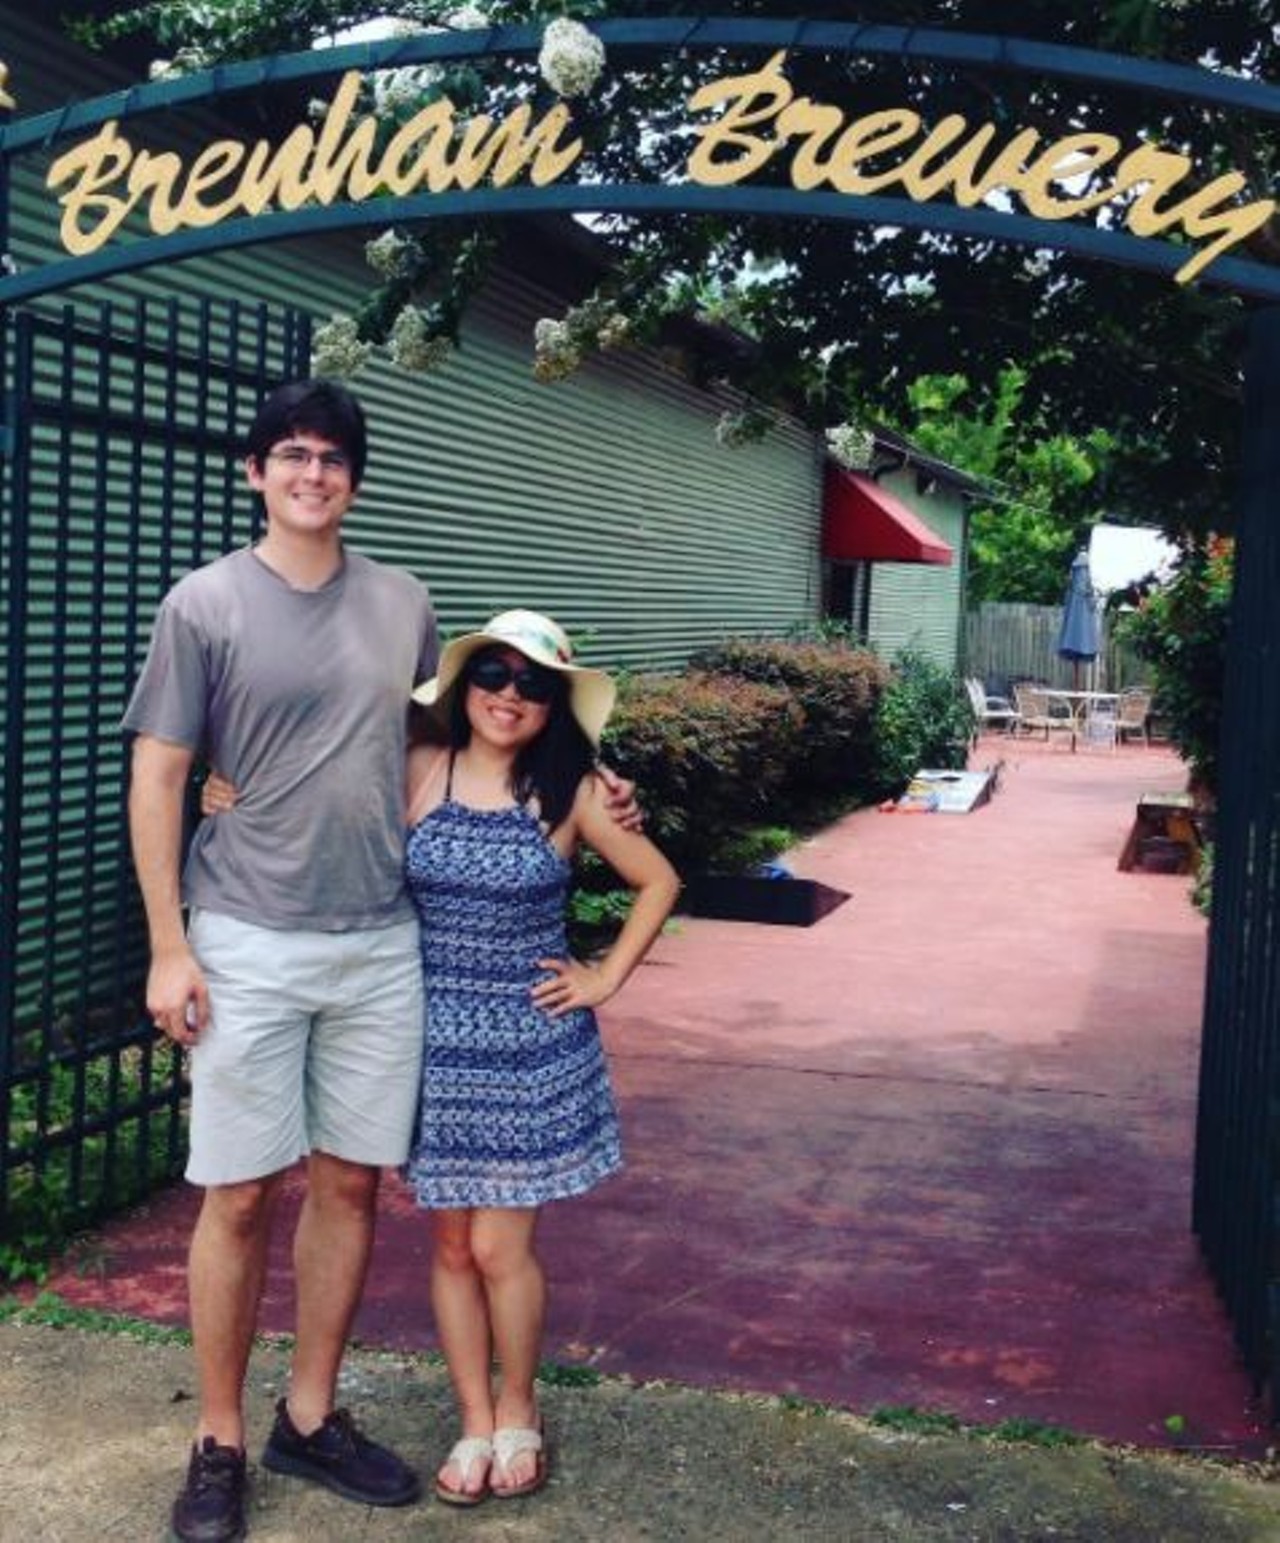 Brazos Valley Brewing Co.
201 W. 1st St., Brenham, (979) 987-1133, brazosvalleybrewery.com
Brazos Valley is family- and pet-friendly, making for the perfect day trip out east. Request a tour of the brewery and enjoy a pint of the Killin&#146; Time Blonde, 7 Spanish Angels Coffee Ale or Silt Brown. Remember to take a growler or six-pack home with you to make your trip worthwhile.
Photo via Instagram, wonju91